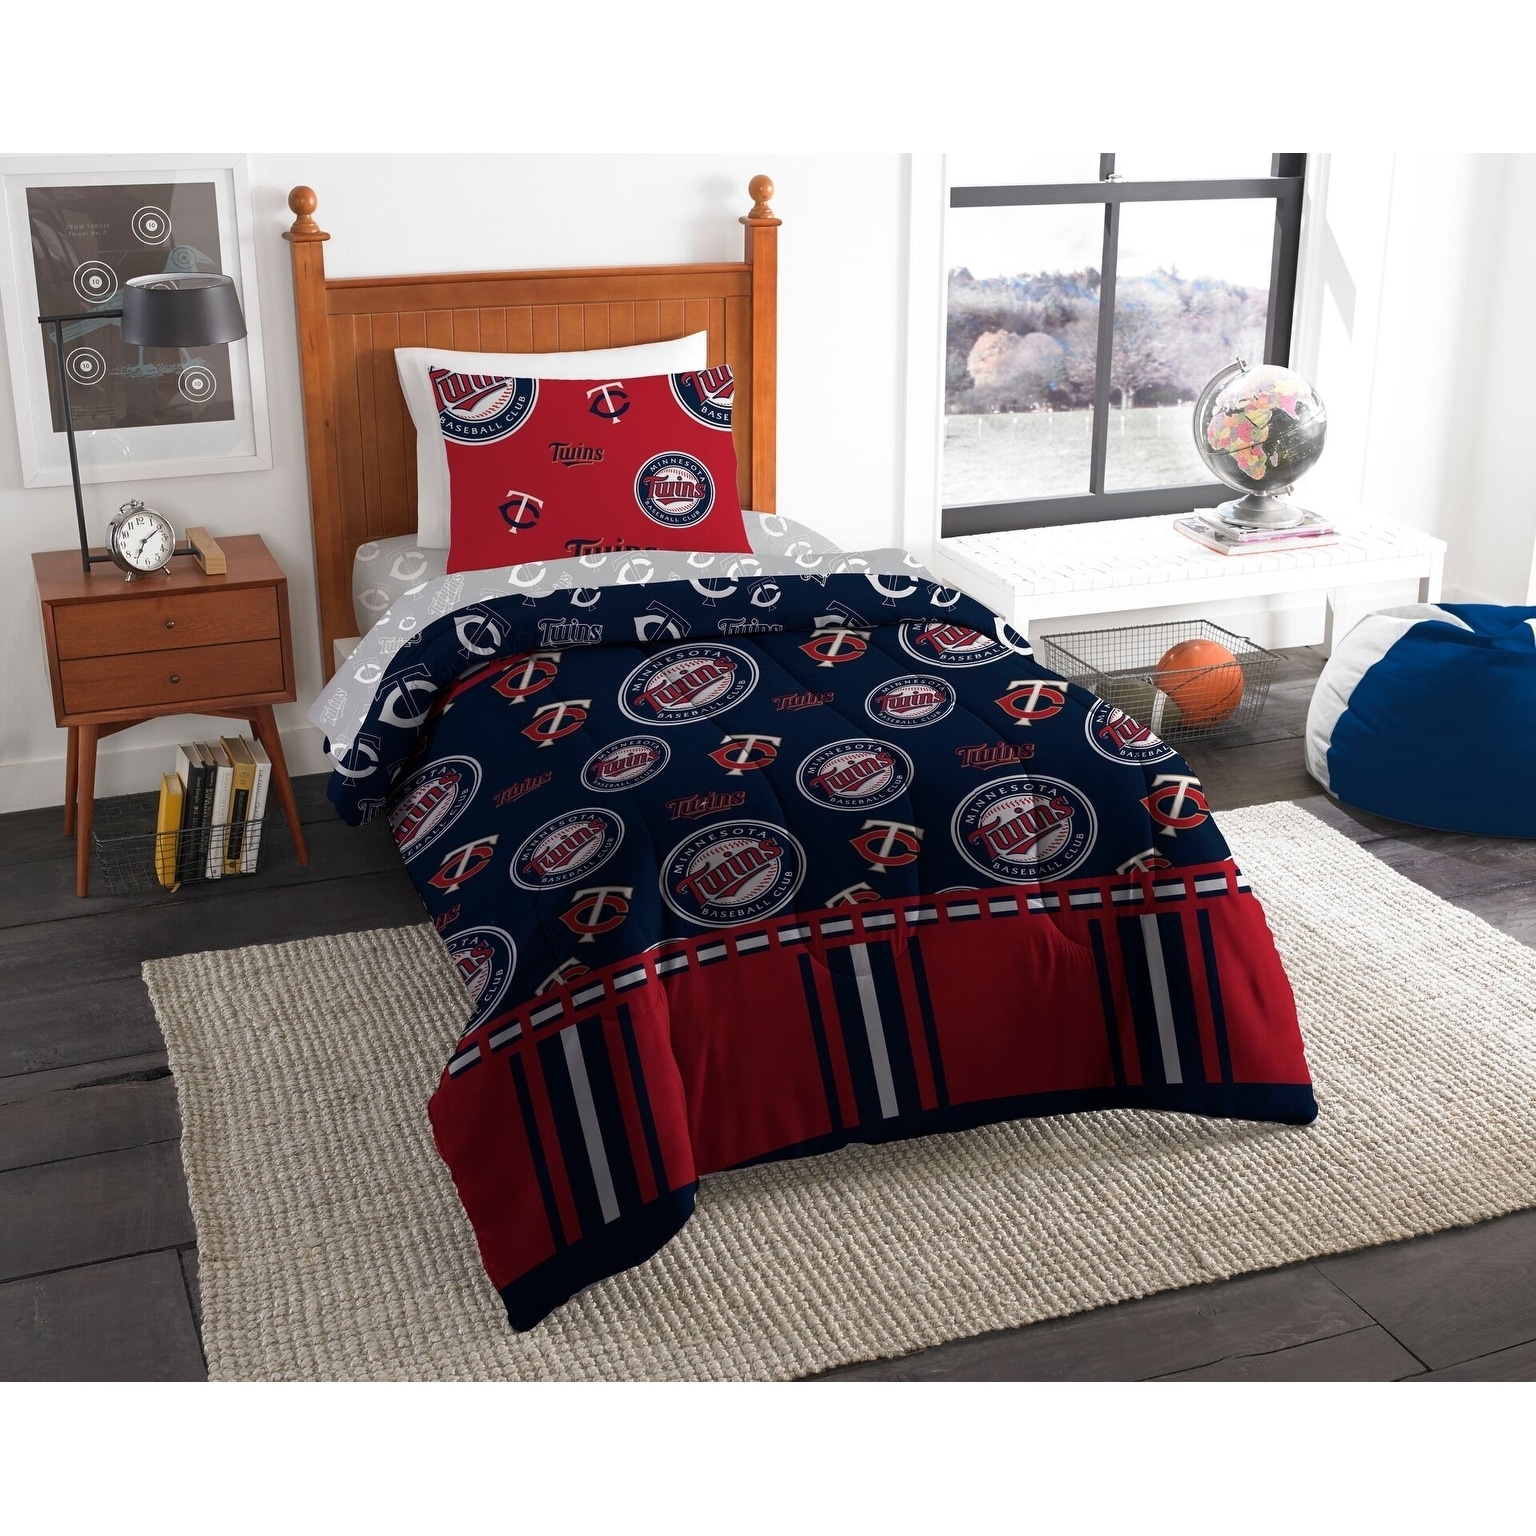 MLB Minnesota Twins Bed In Bag Set, Queen Size, Team Colors, 100%  Polyester, 5 Piece Set